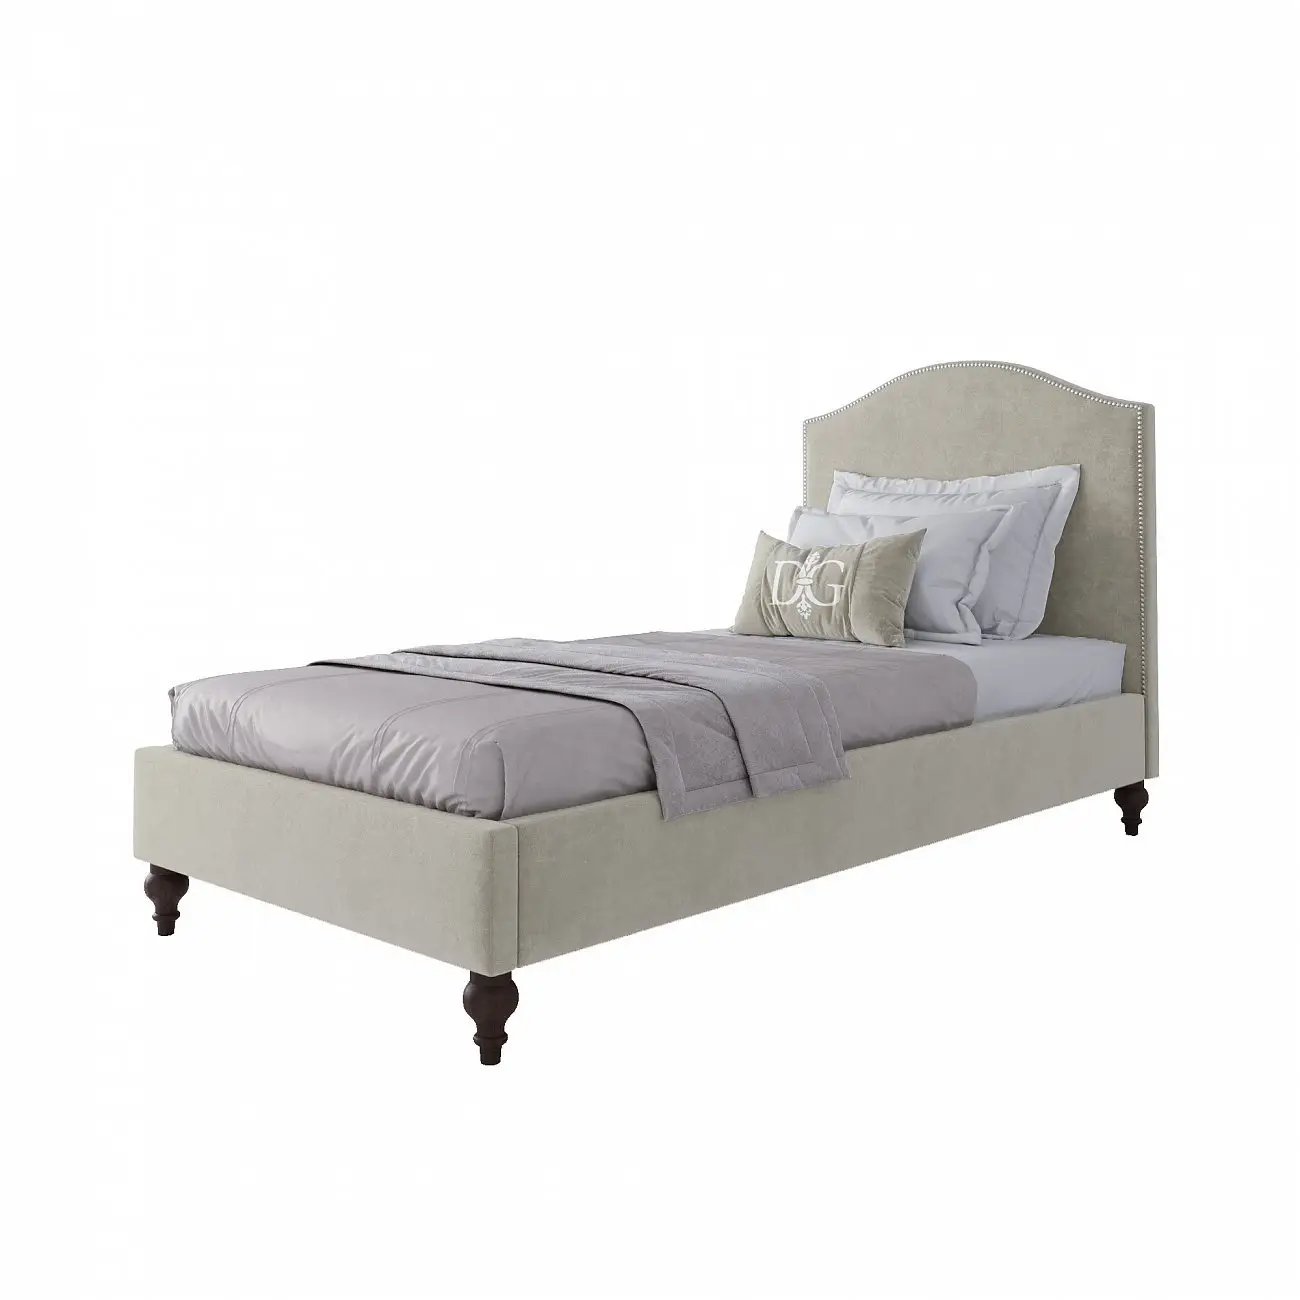 Single bed with upholstered headboard 90x200 cm beige Fleurie